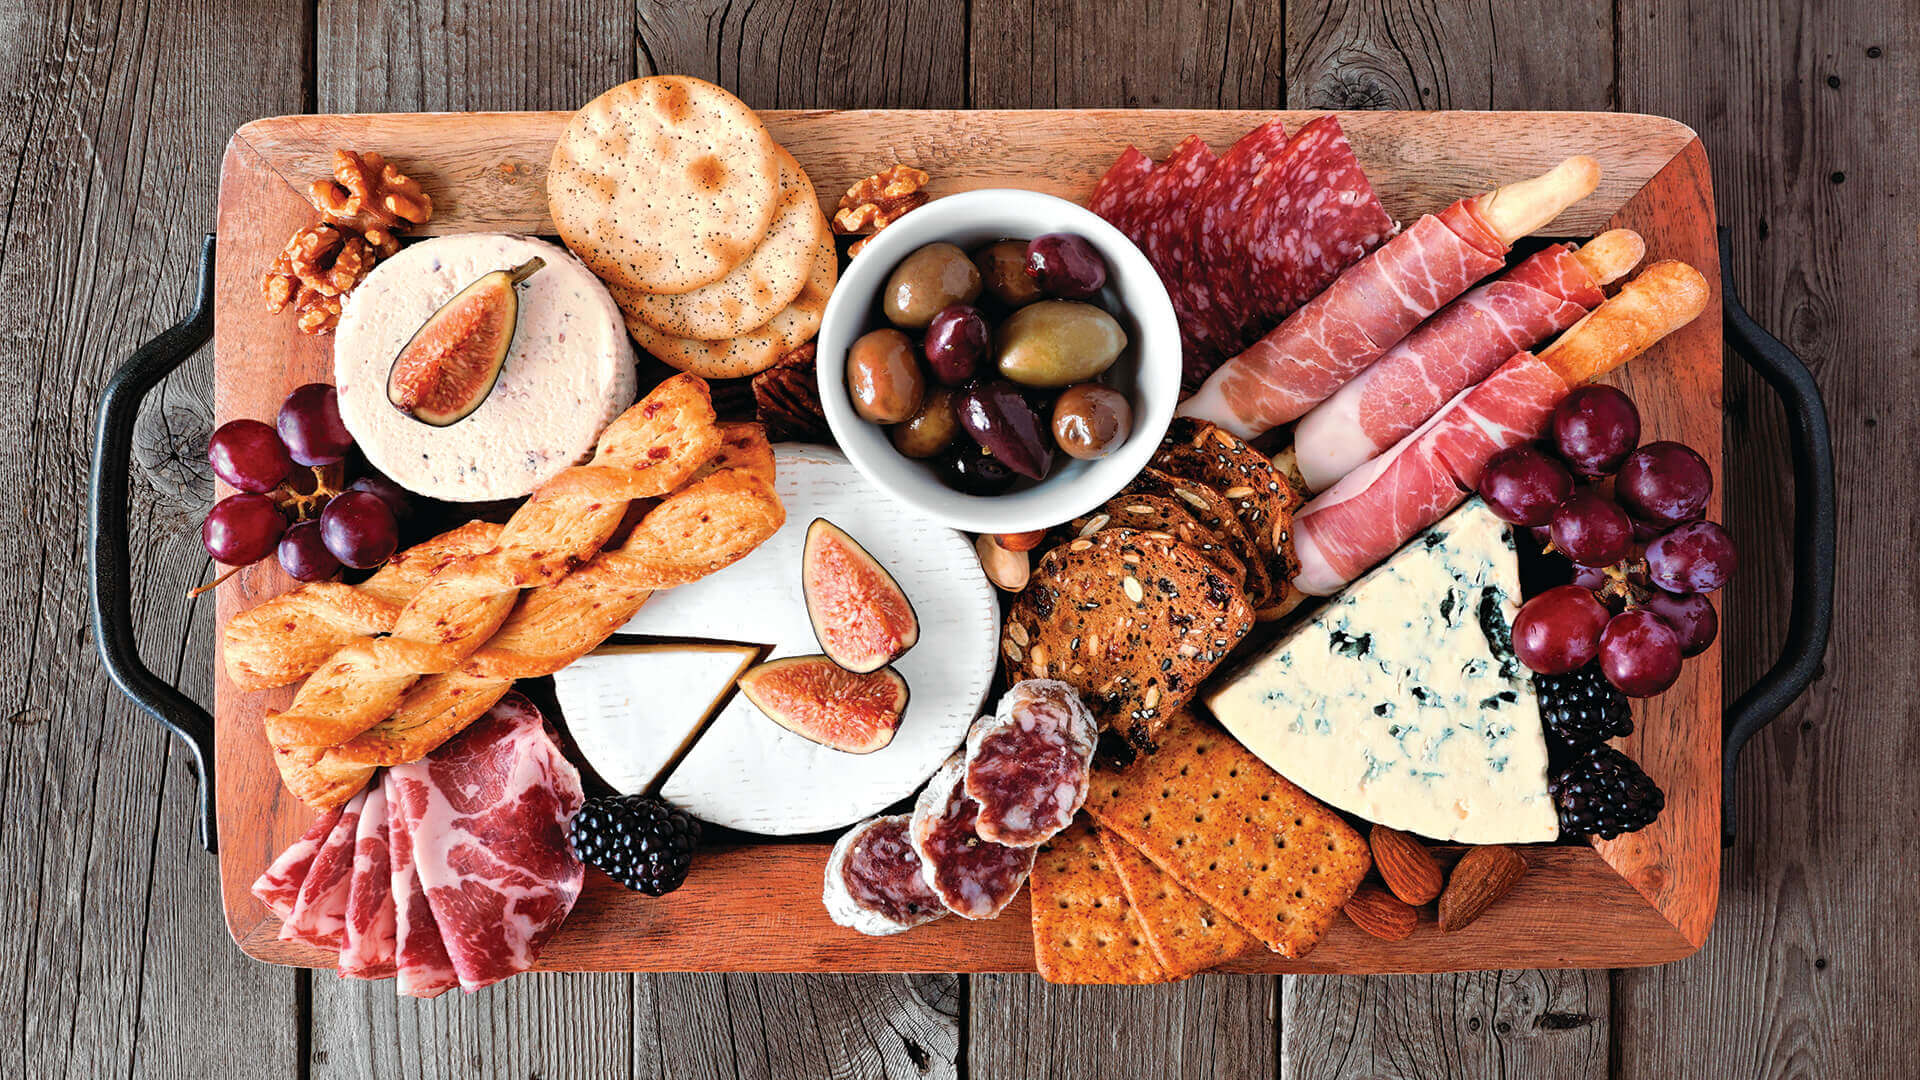 gluten-free party food ideas: grazing platter with gluten-free crackers